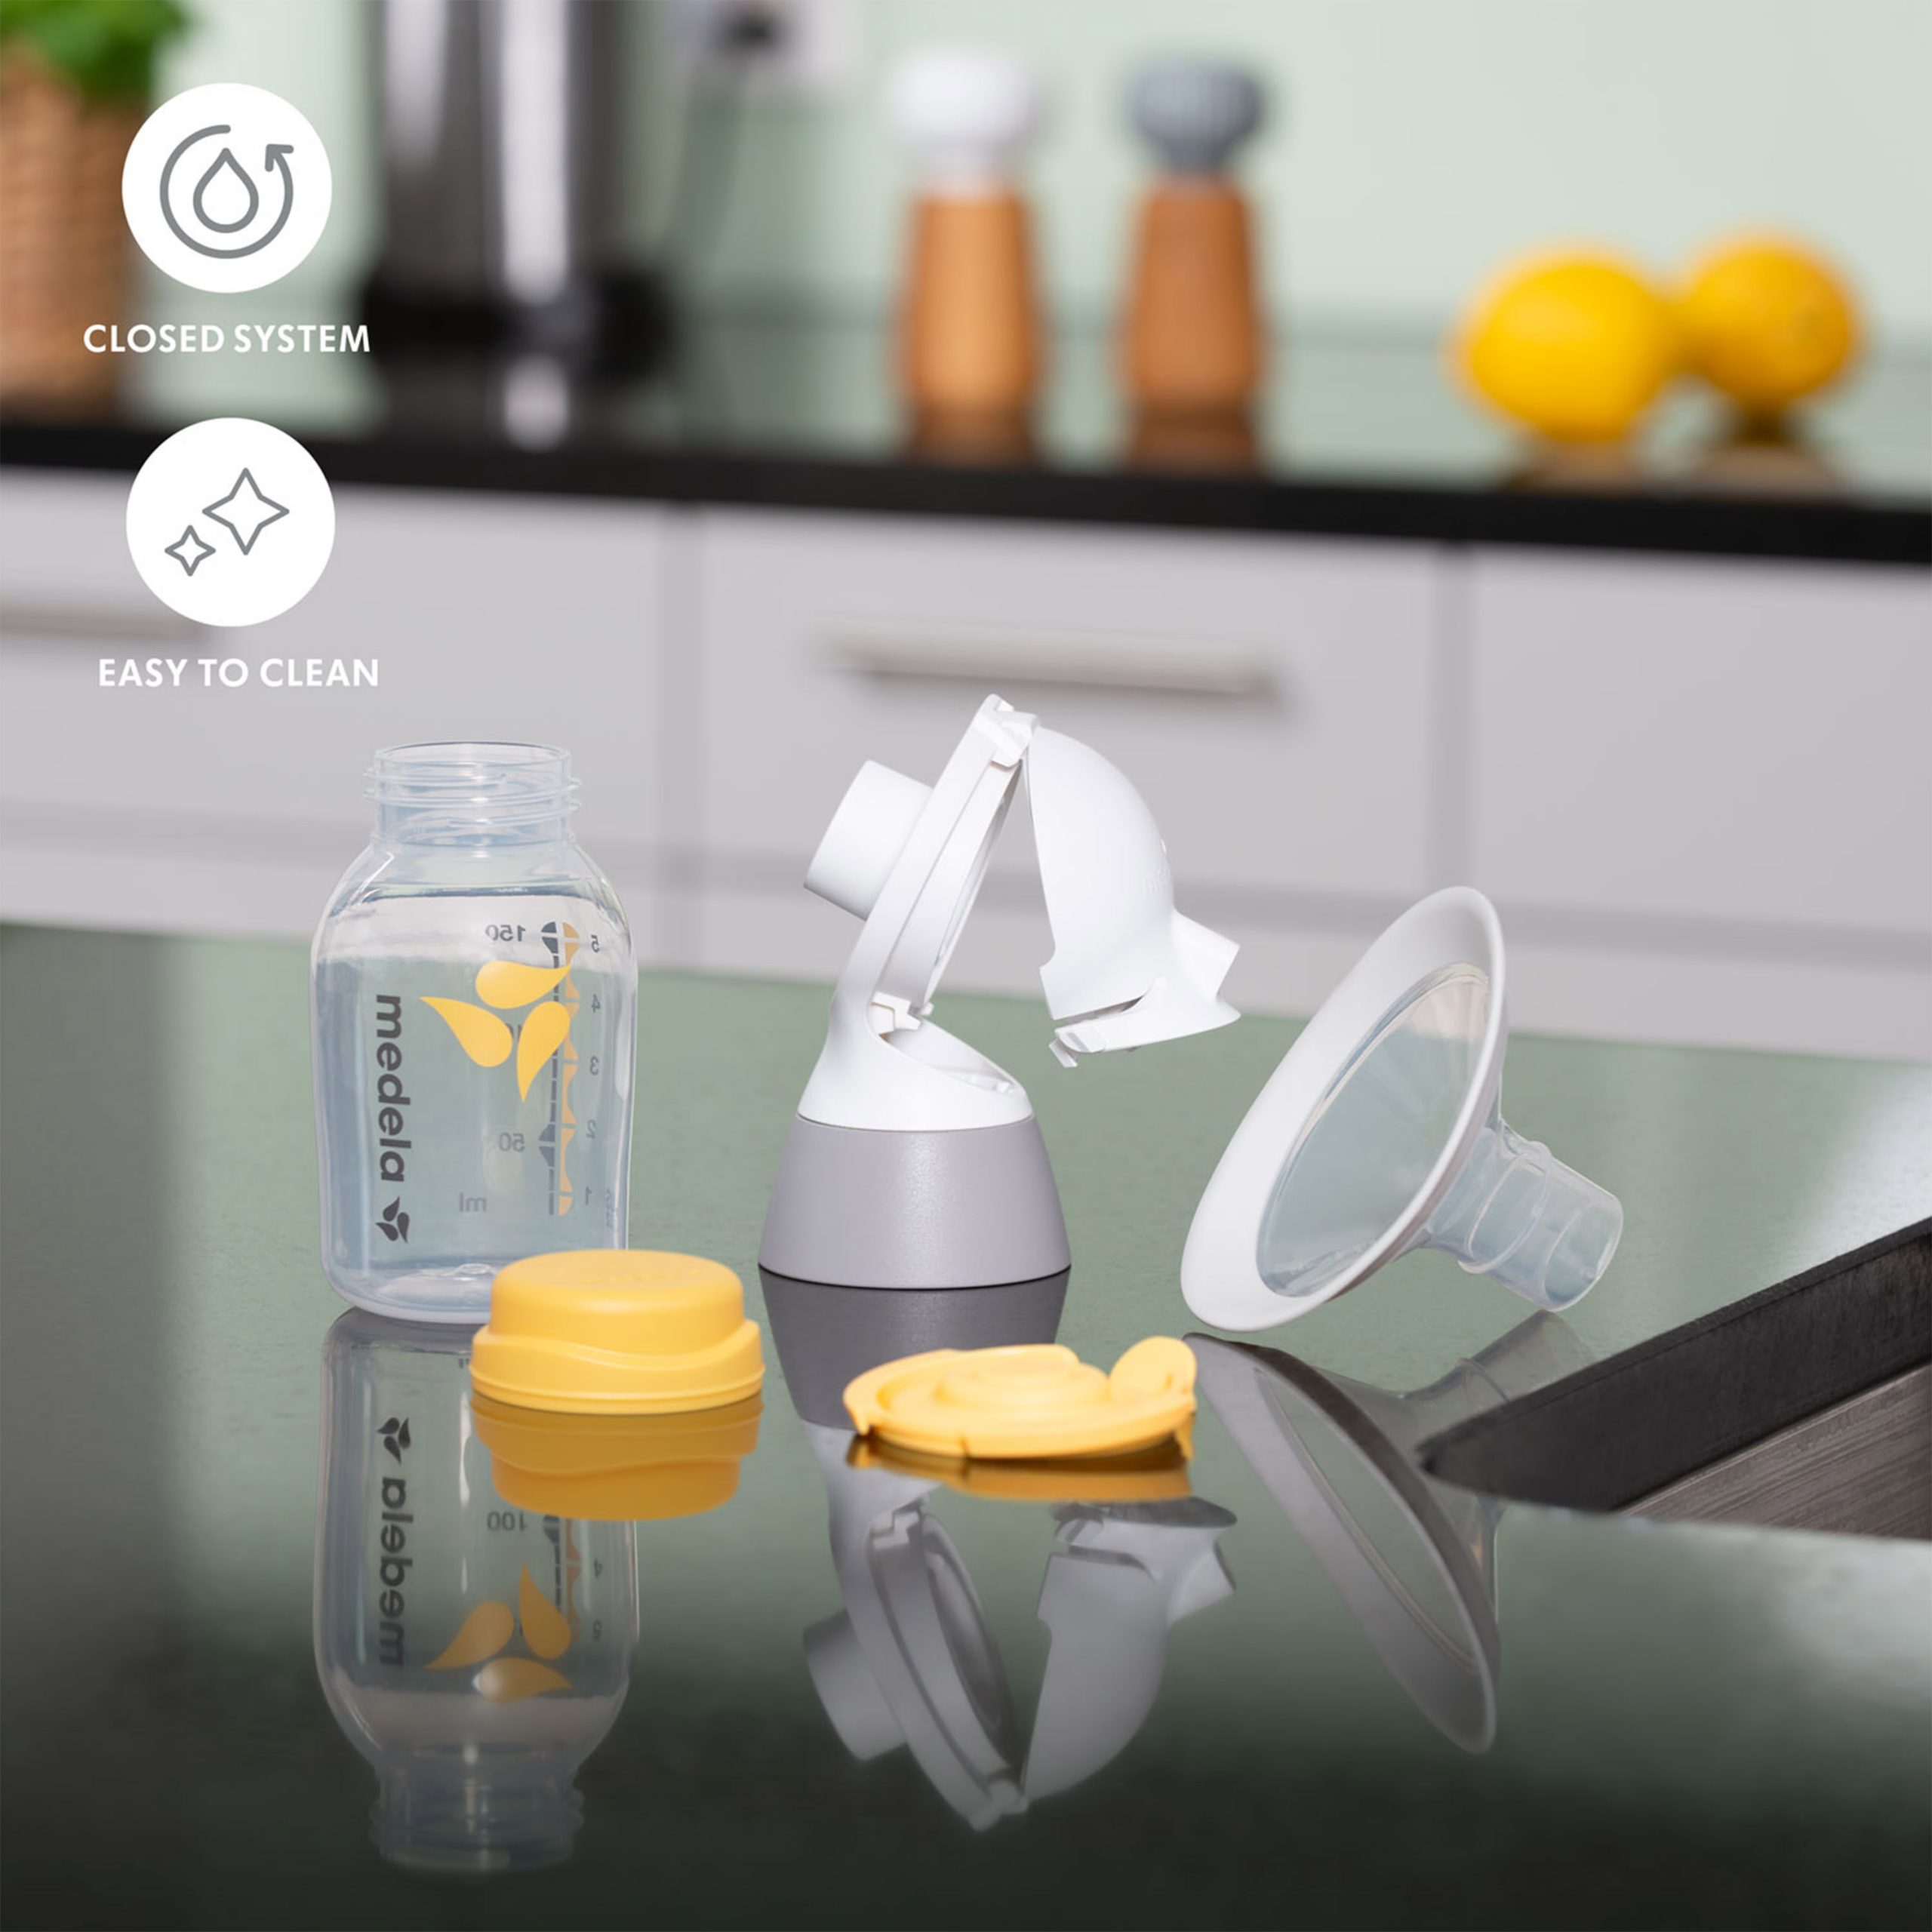 Medela Swing Maxi™ Double Electric Breast Pump - The Care Connection